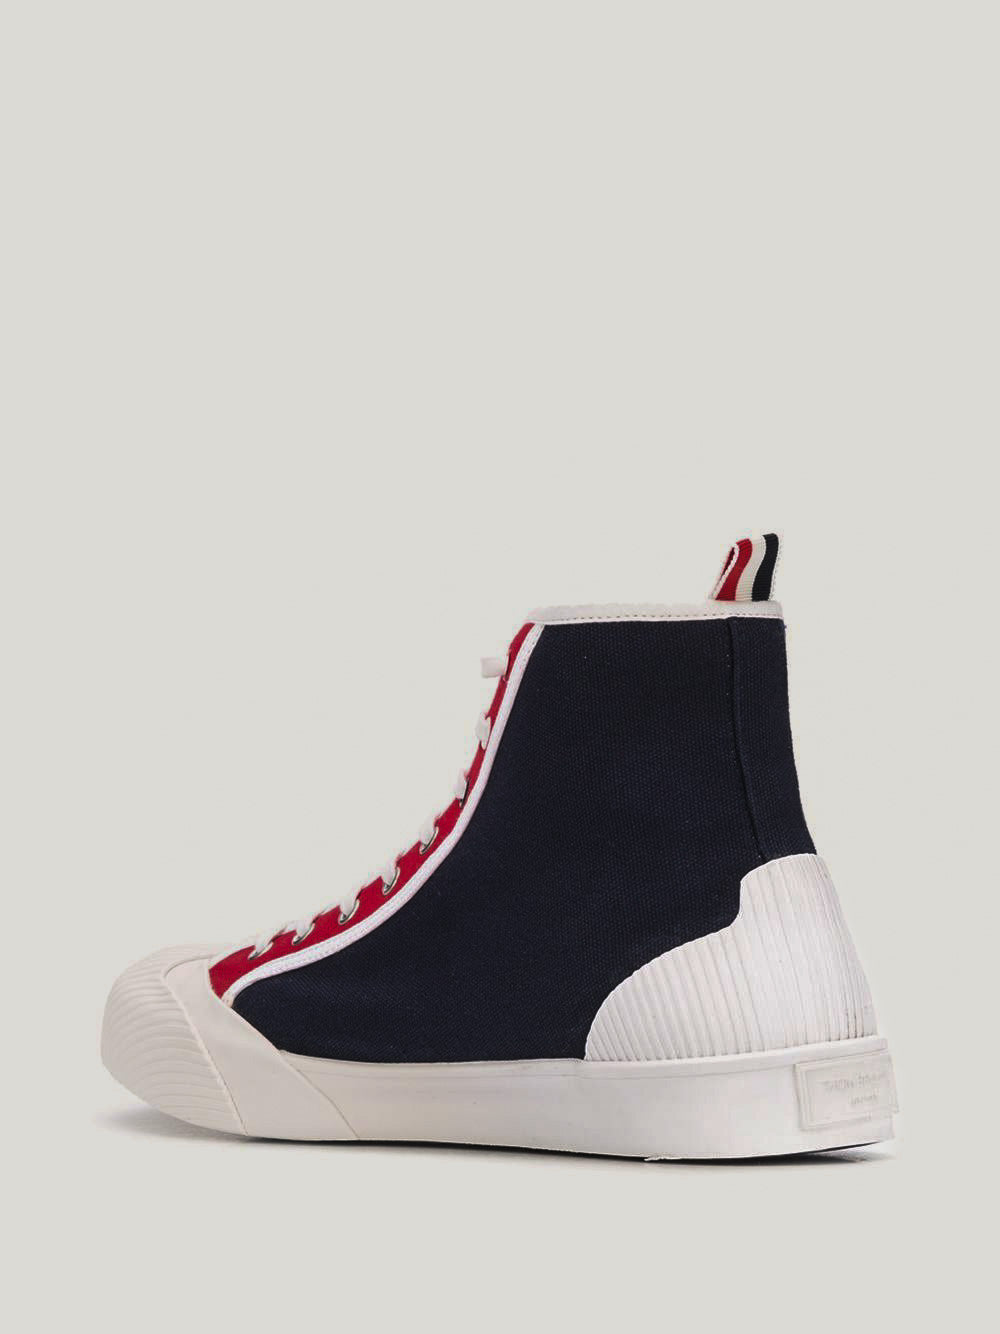 Thom Browne Contrast-Panel High-Top Sneakers (Size 38.5)